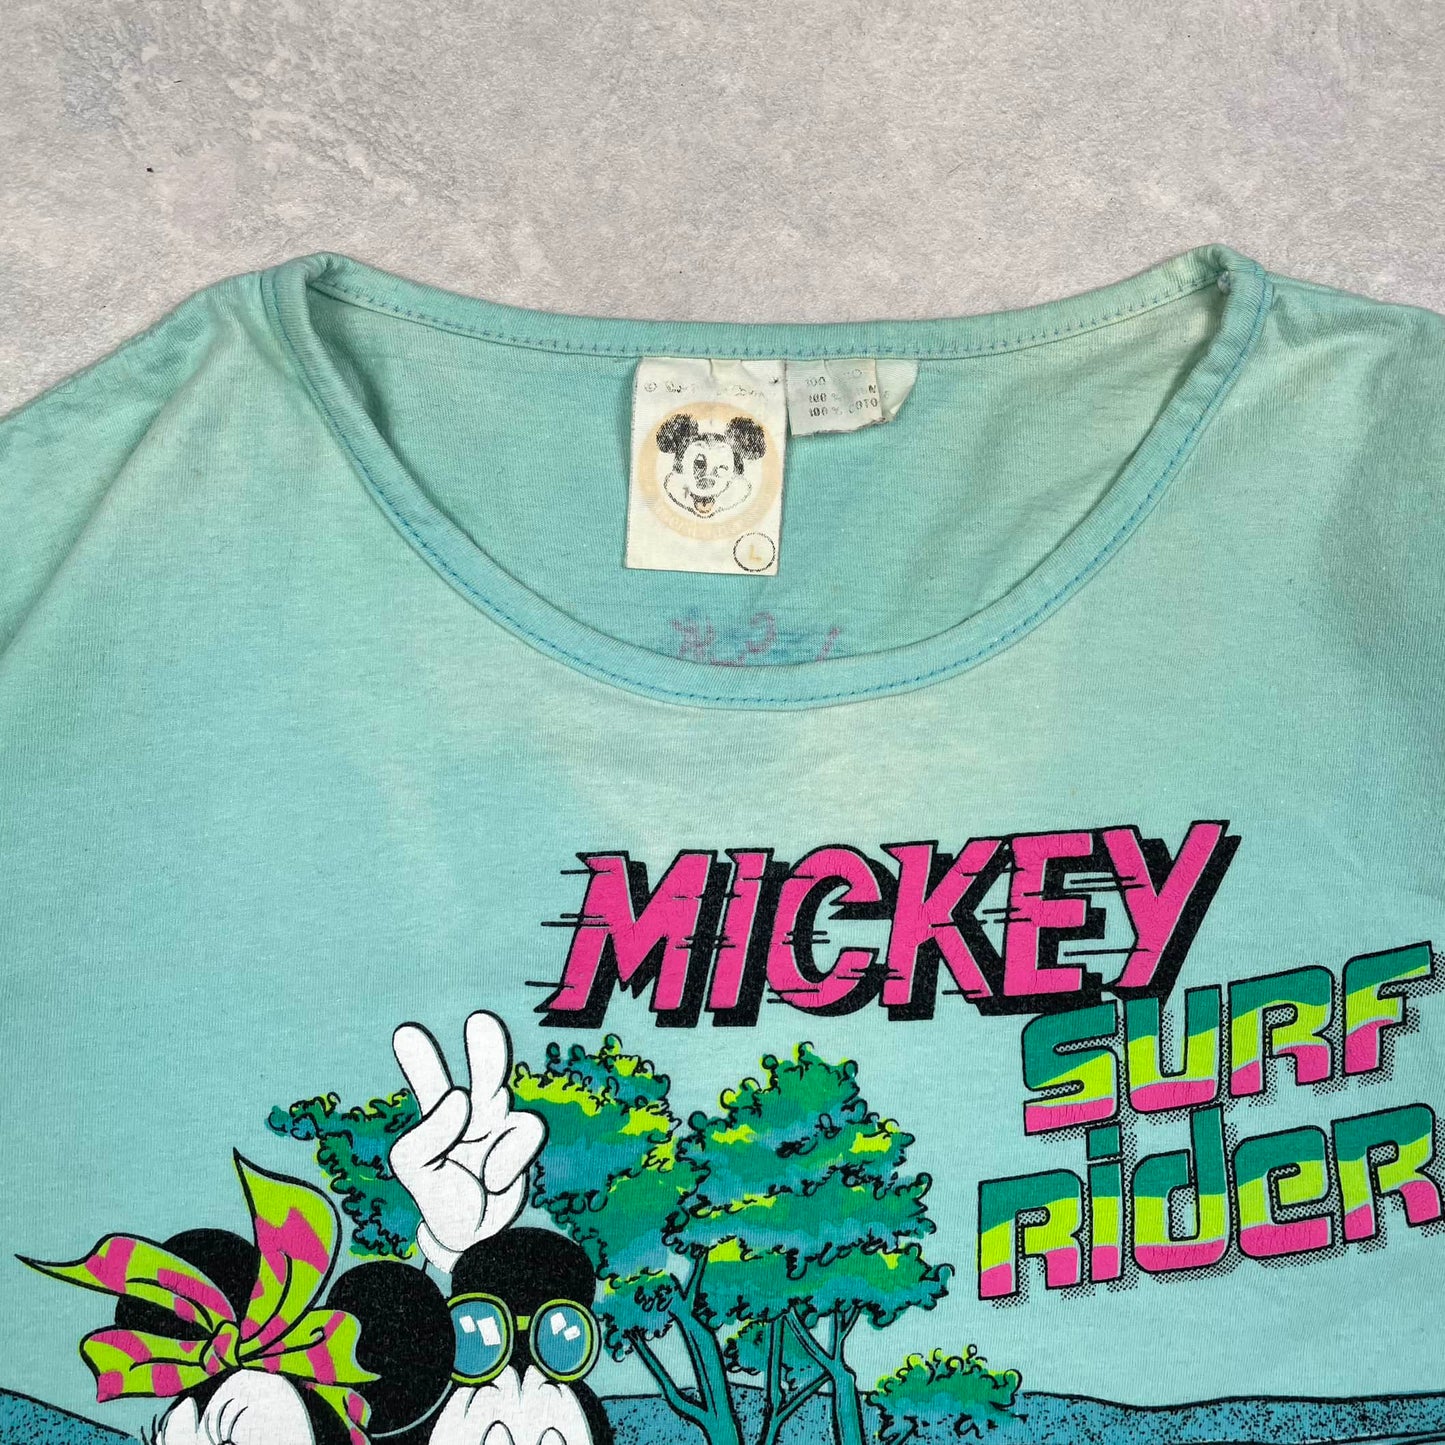 Vintage Single Stitch T-Shirt Disney “Mickey Surf Riders” Made in USA